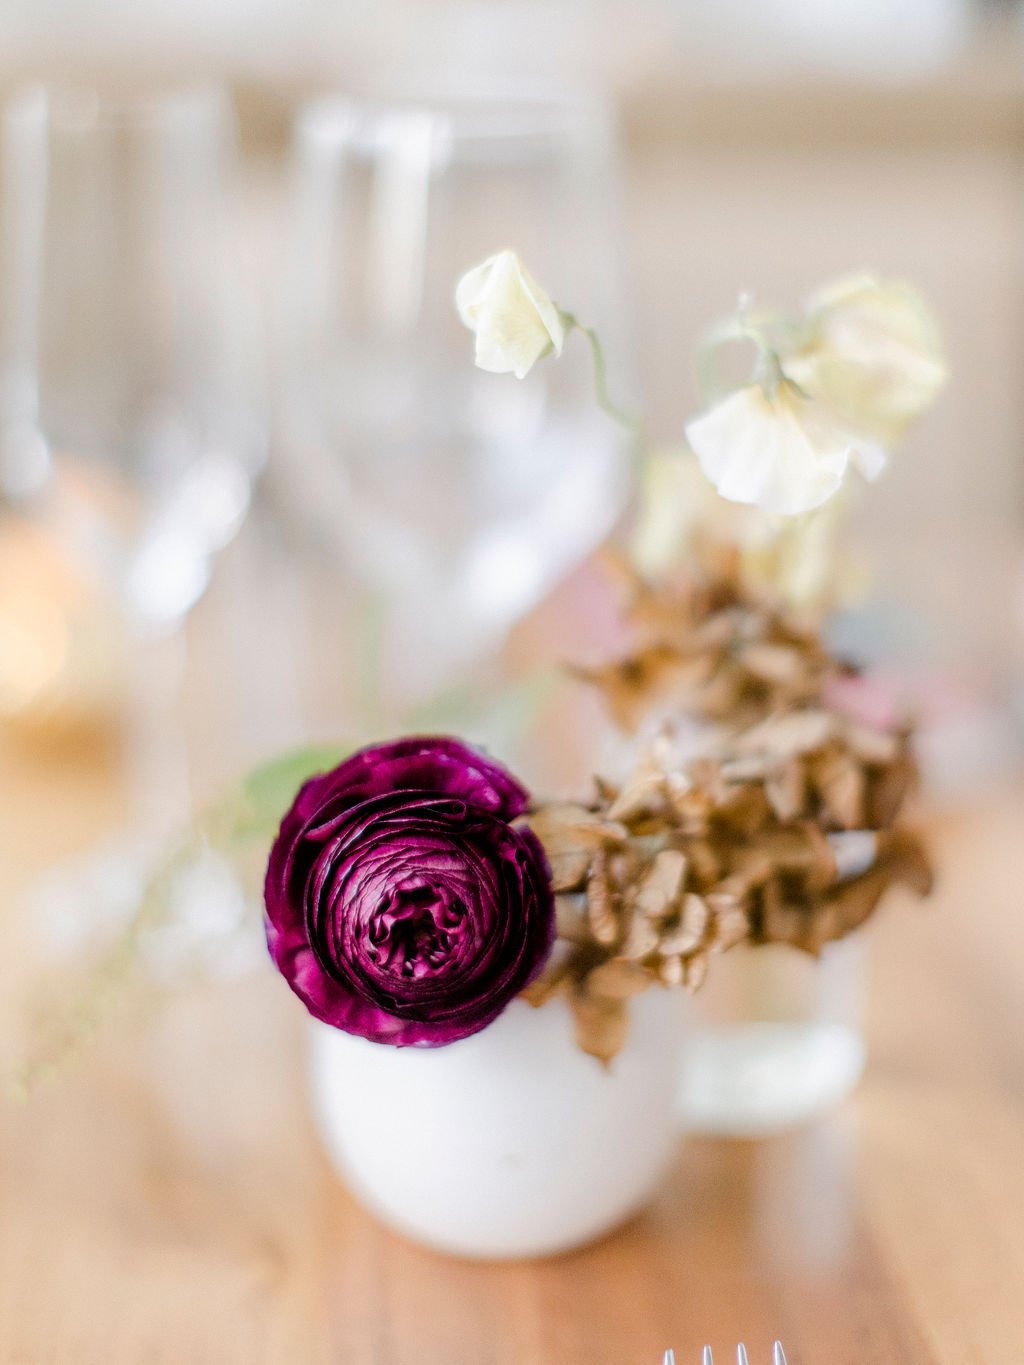 Dainty bud vases of tulips, ranunculus, and fall foliage accenting the reception space. Buds offering pops of warm color and elegance to the smaller spaces of the St. Cecilia restaurant. Floral design by Rosemary and Finch in Nashville, TN.